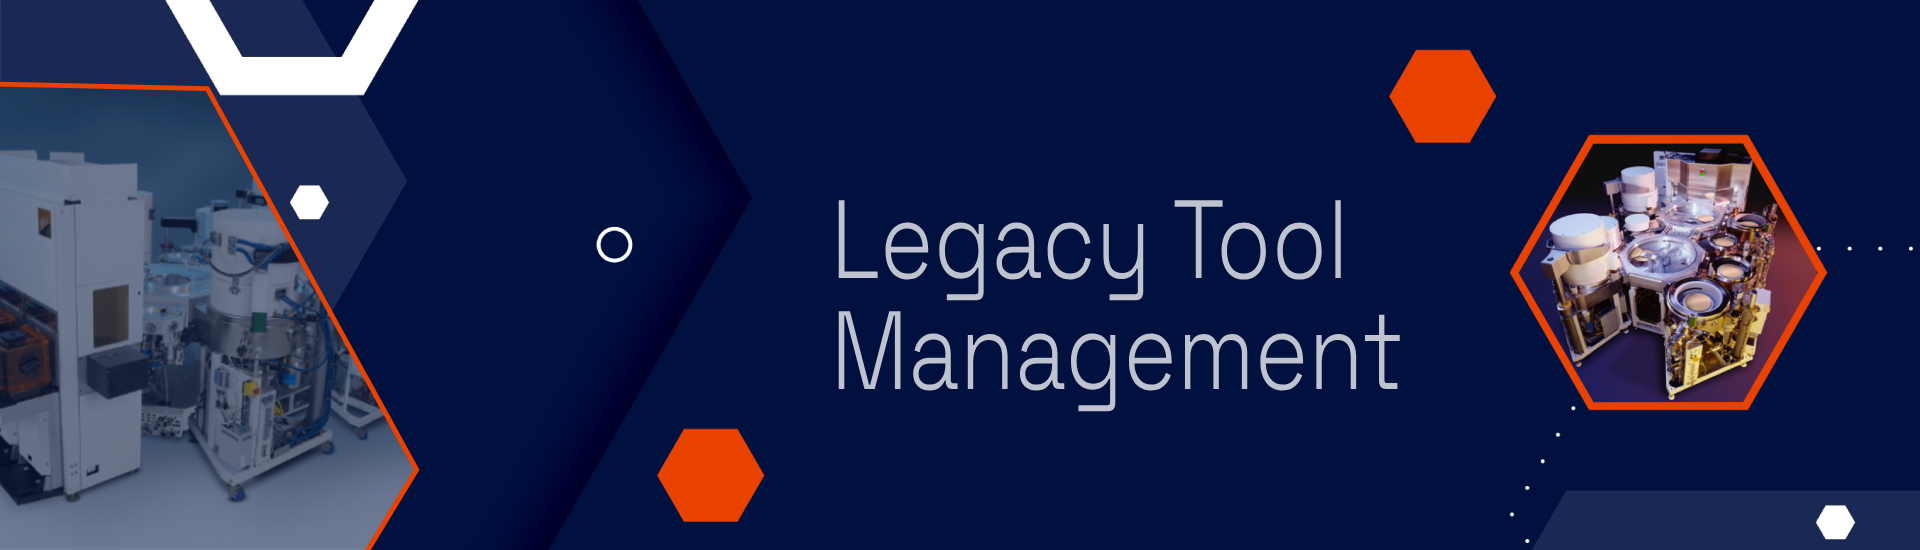 legacy_tool_management_banner